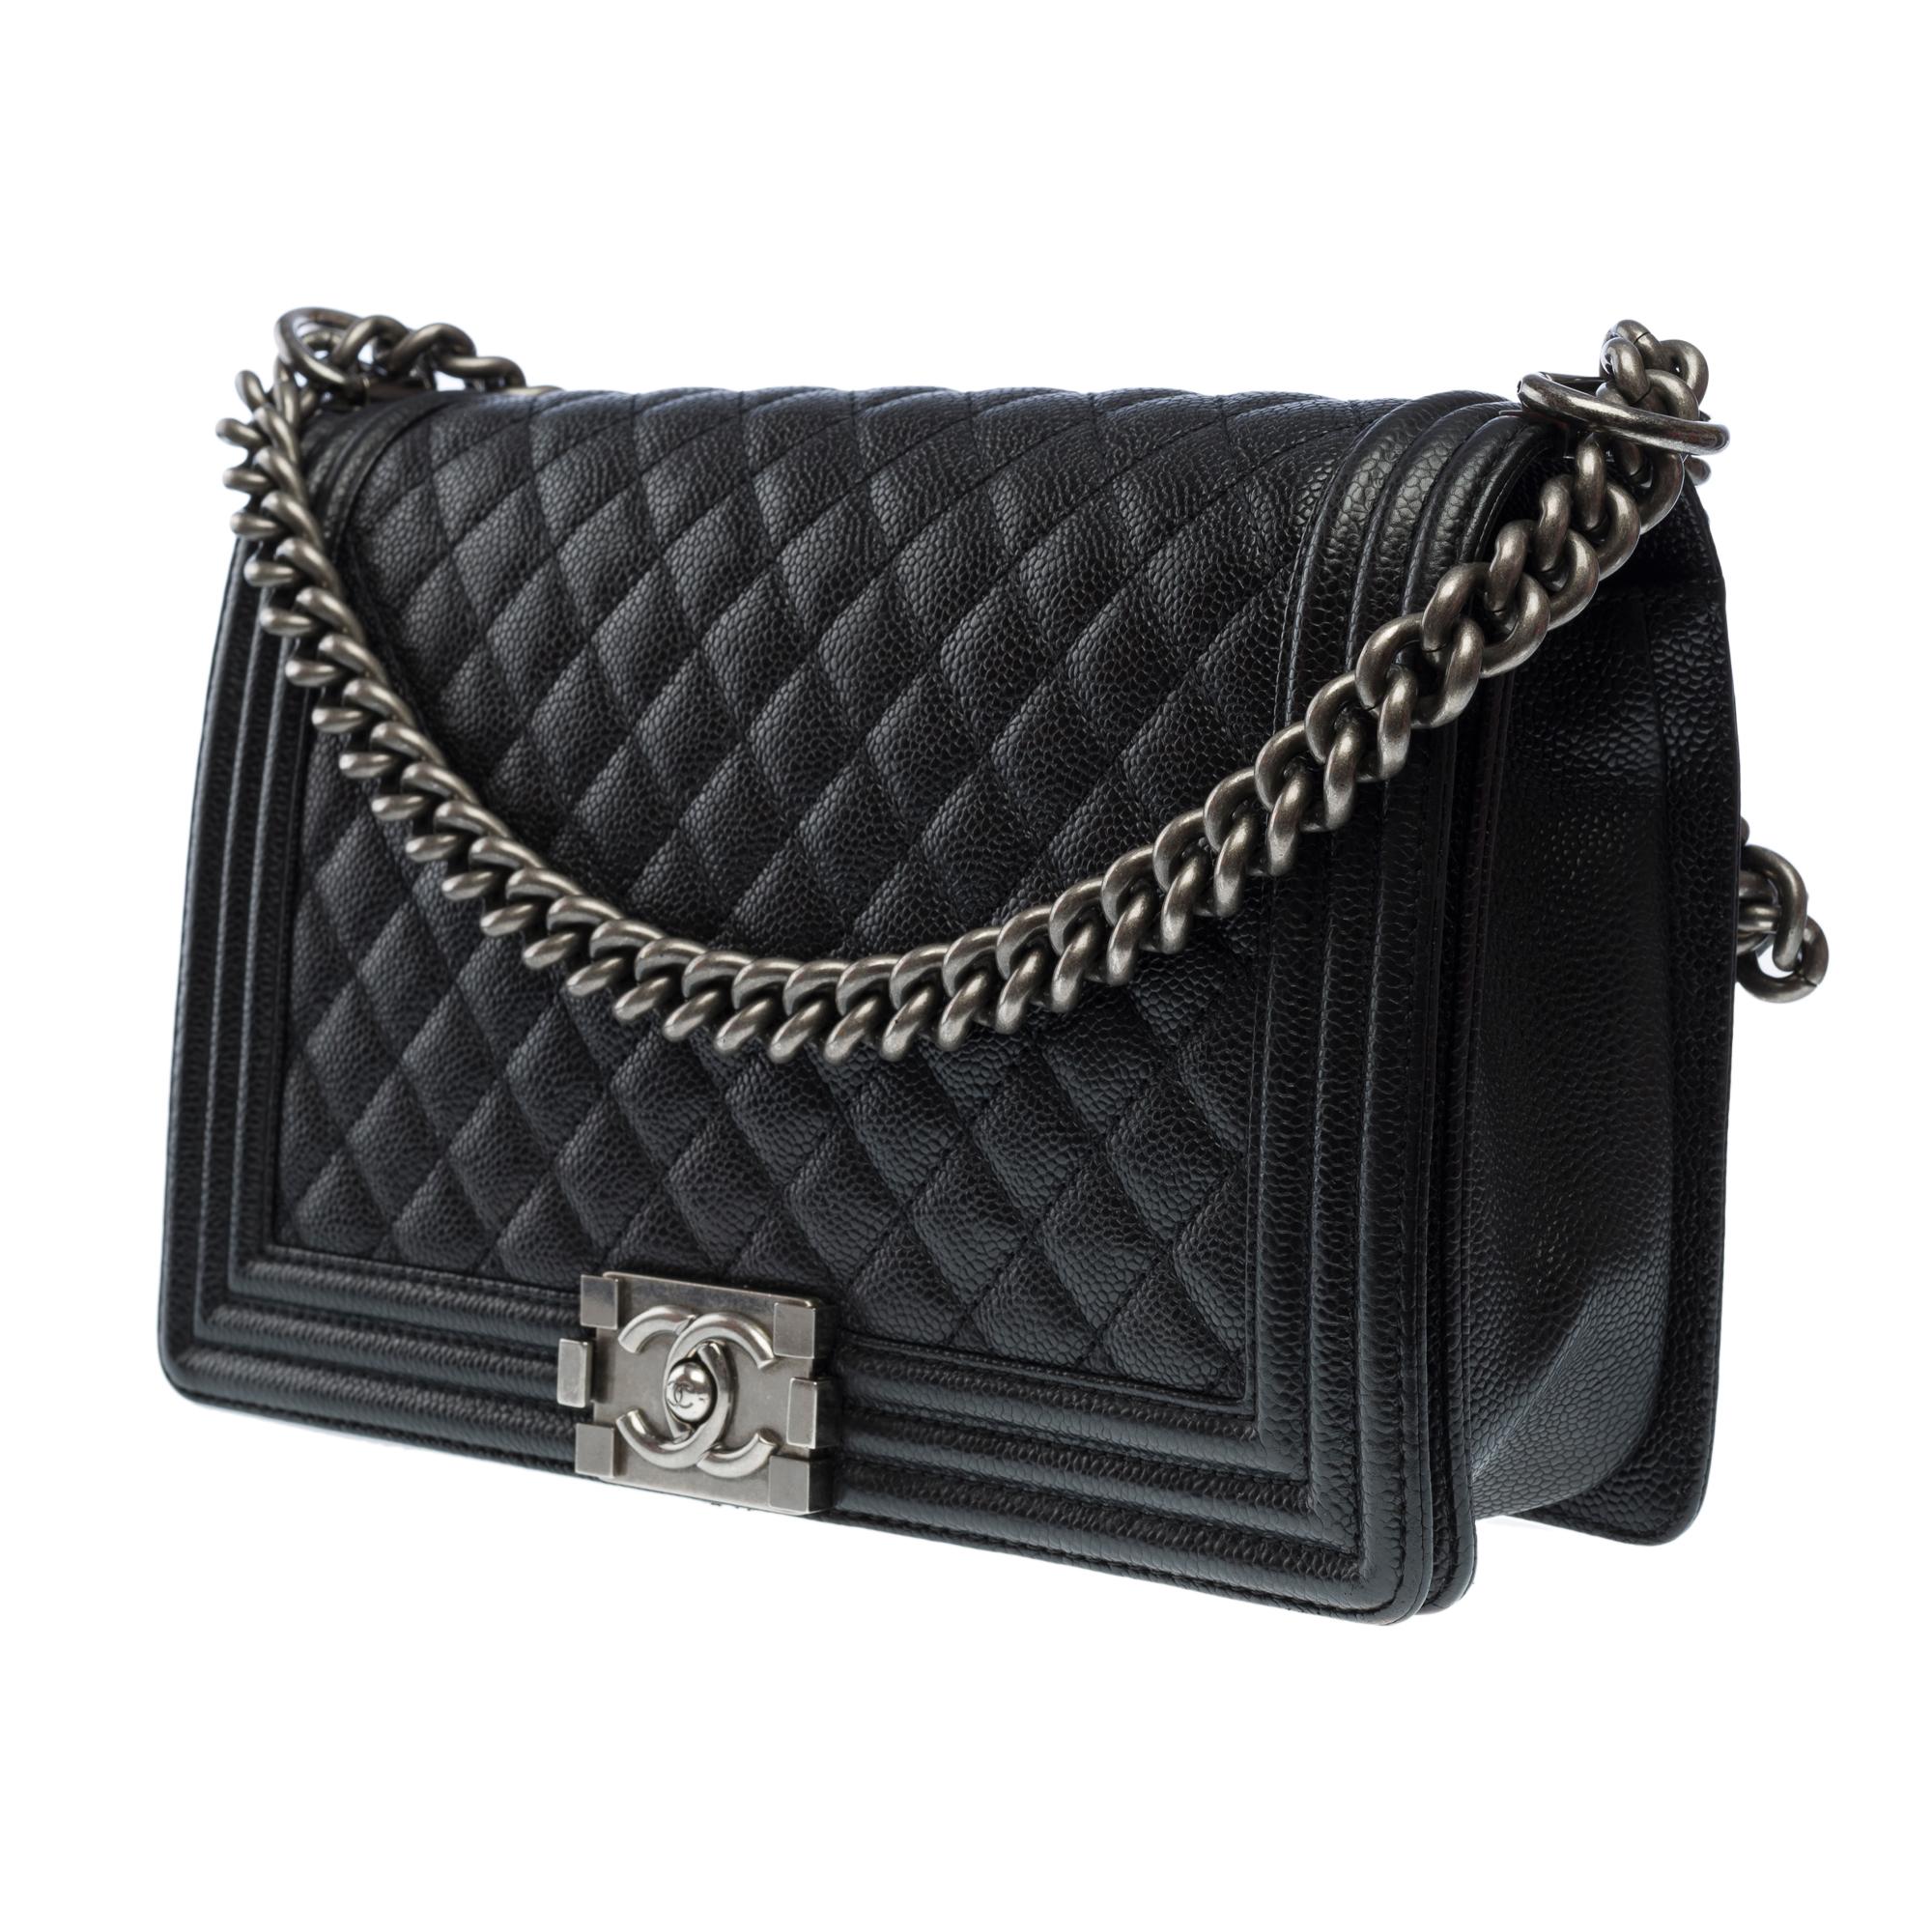 Women's Chanel Boy New medium shoulder bag in black caviar quilted leather, SHW ! For Sale